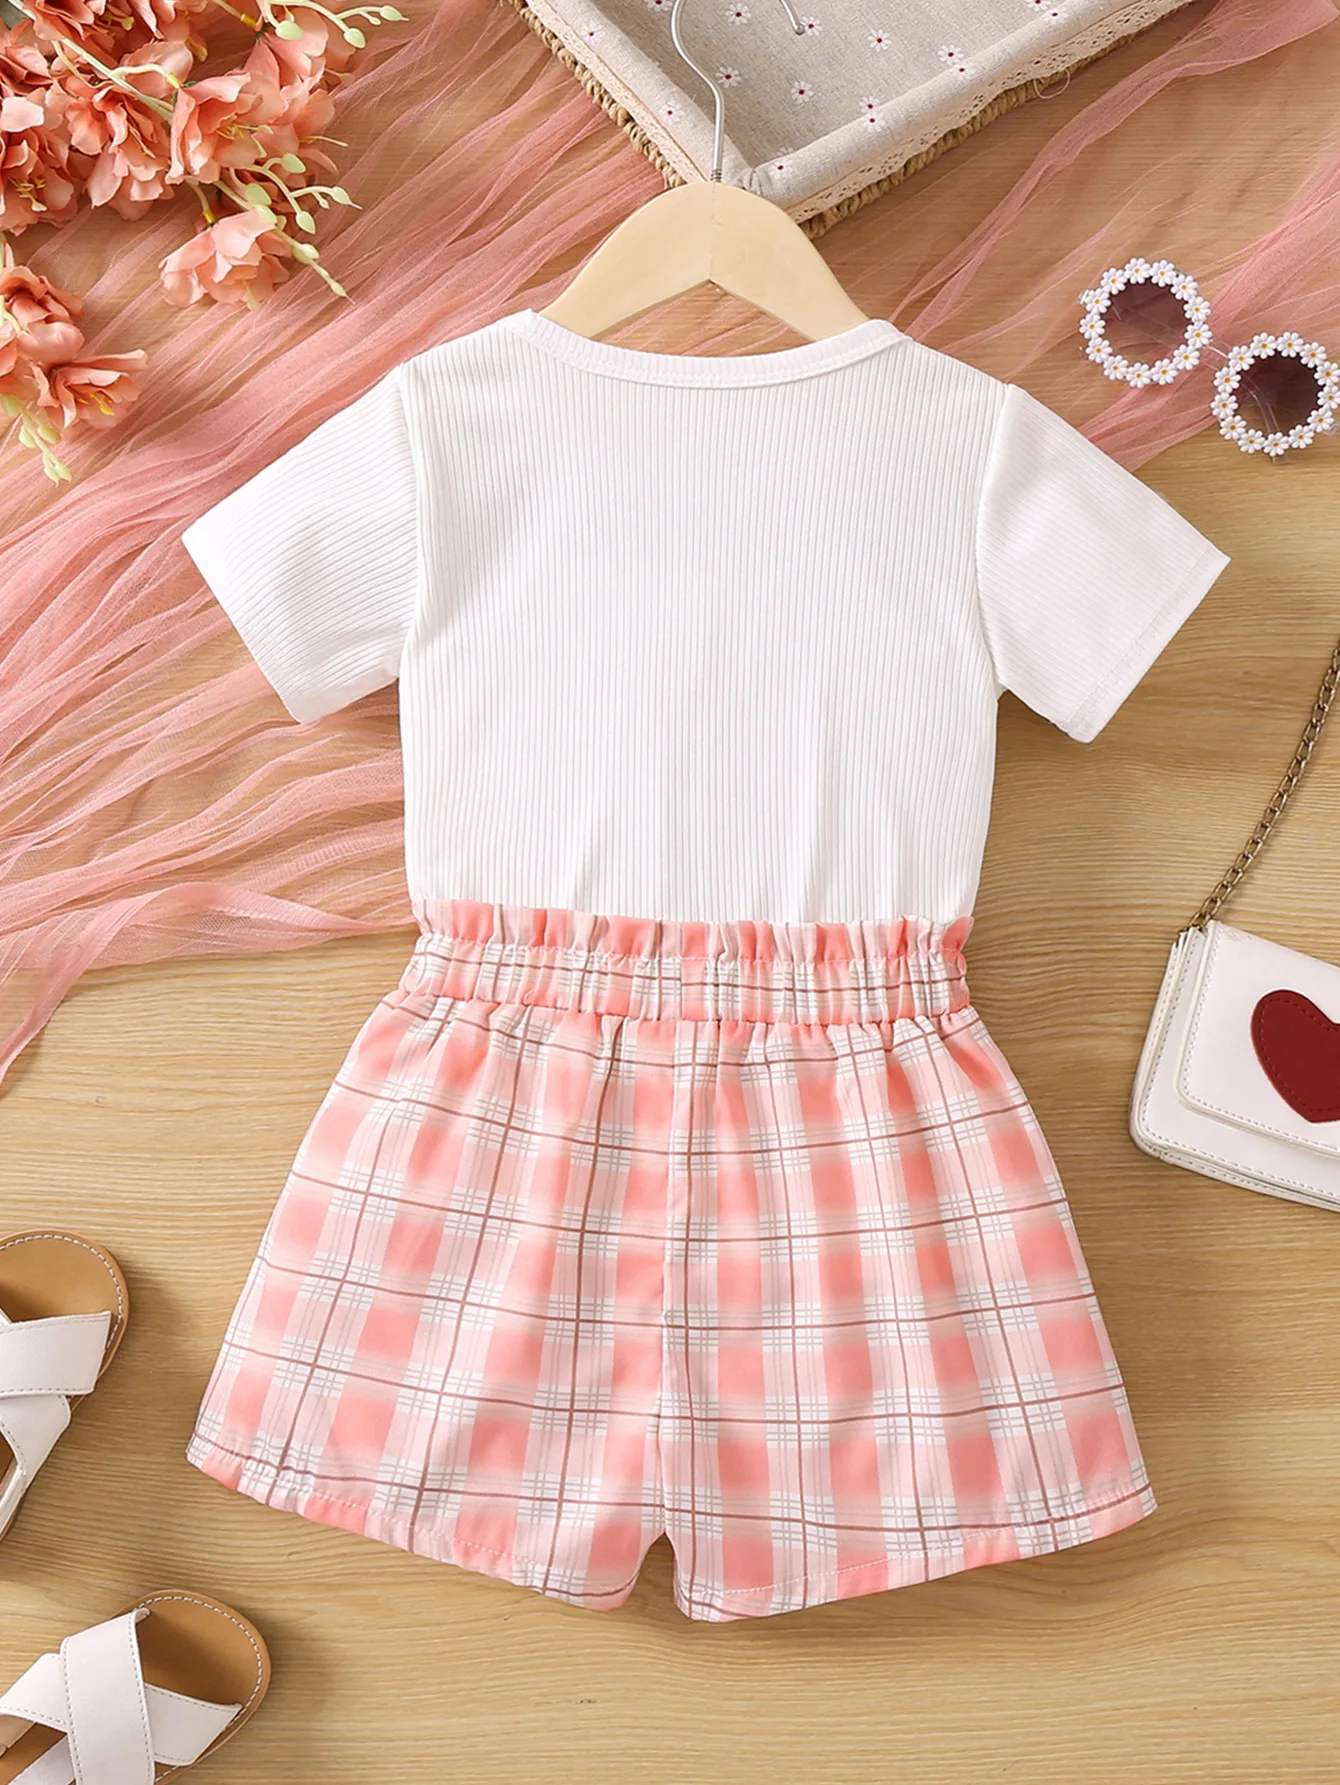 New trendy toddler little girl's clothing short sleeve shirts matching plaid shorts boutique children kids fashion sets